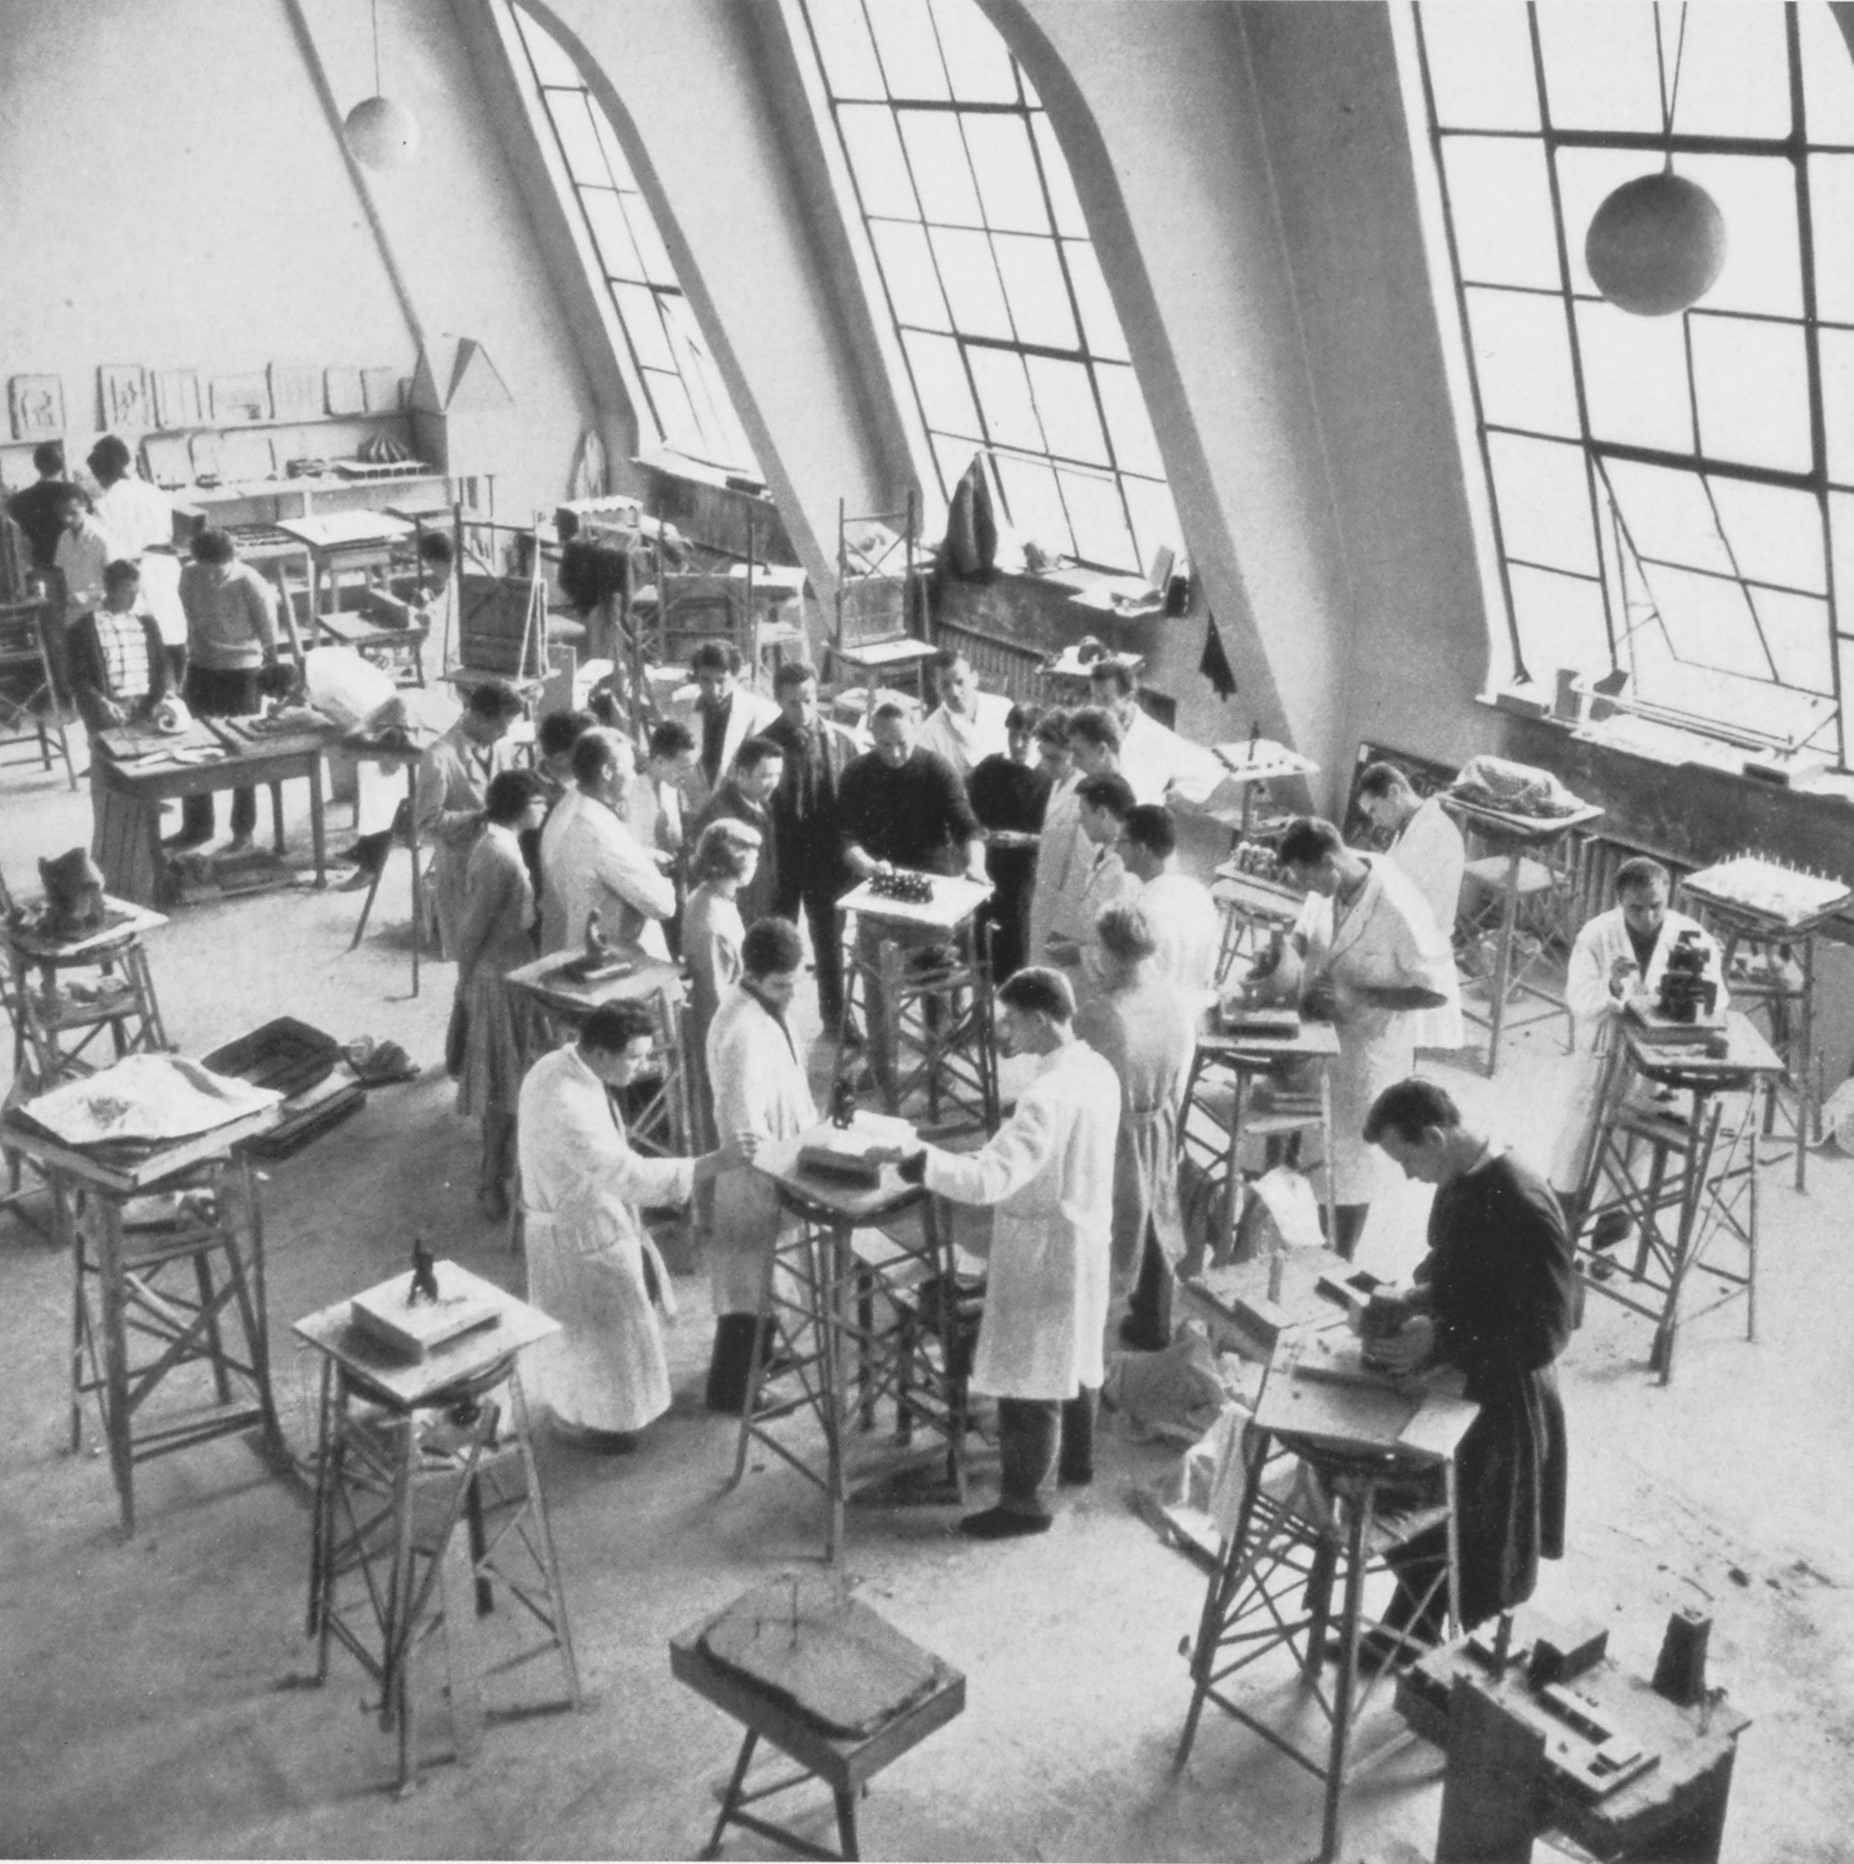 Historical image of architecture students on a practical course at the Department of Physics.